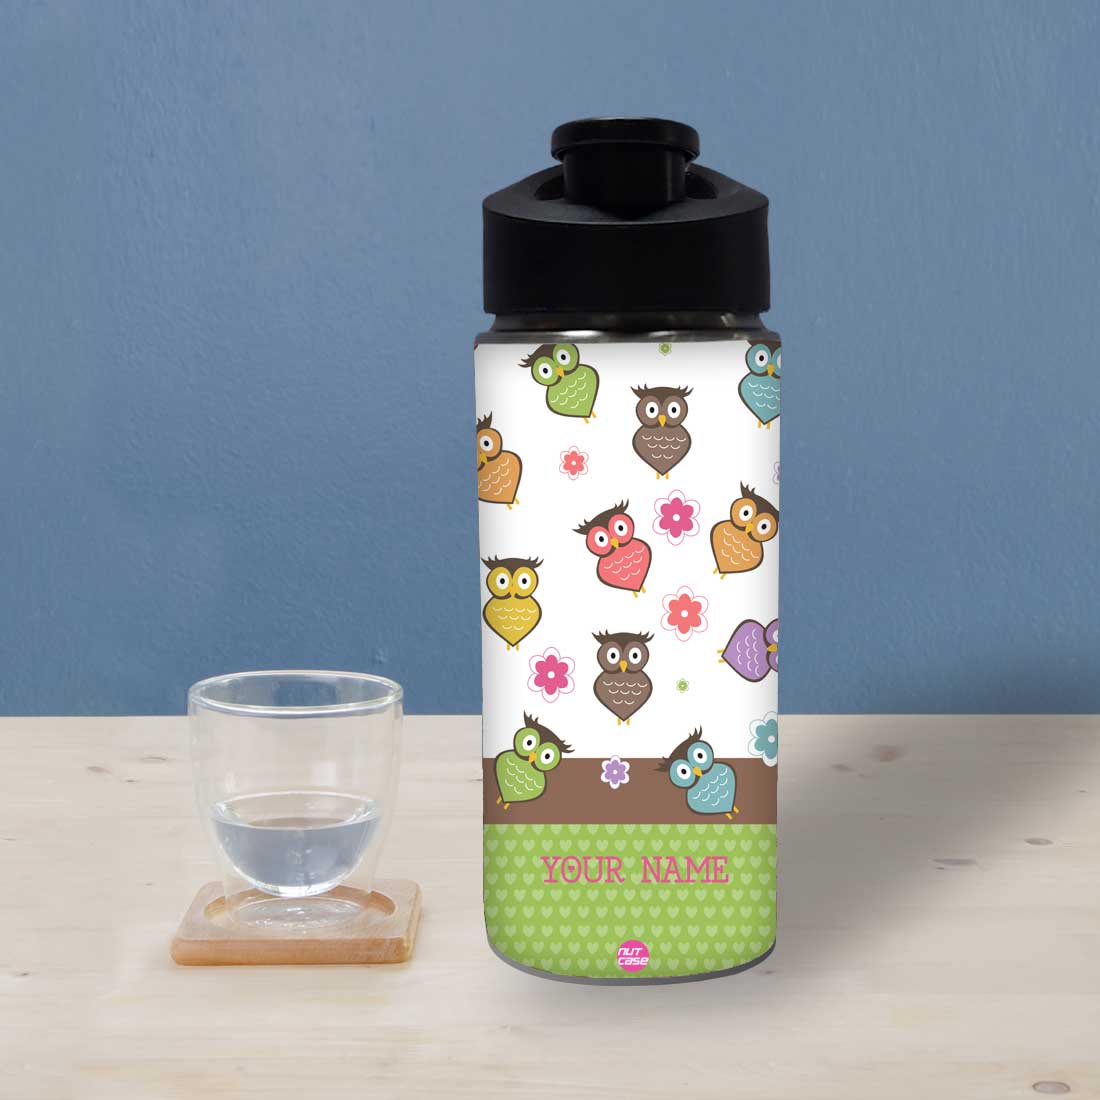 Customised Water Bottle with Name Printed-Owl and Floral Nutcase